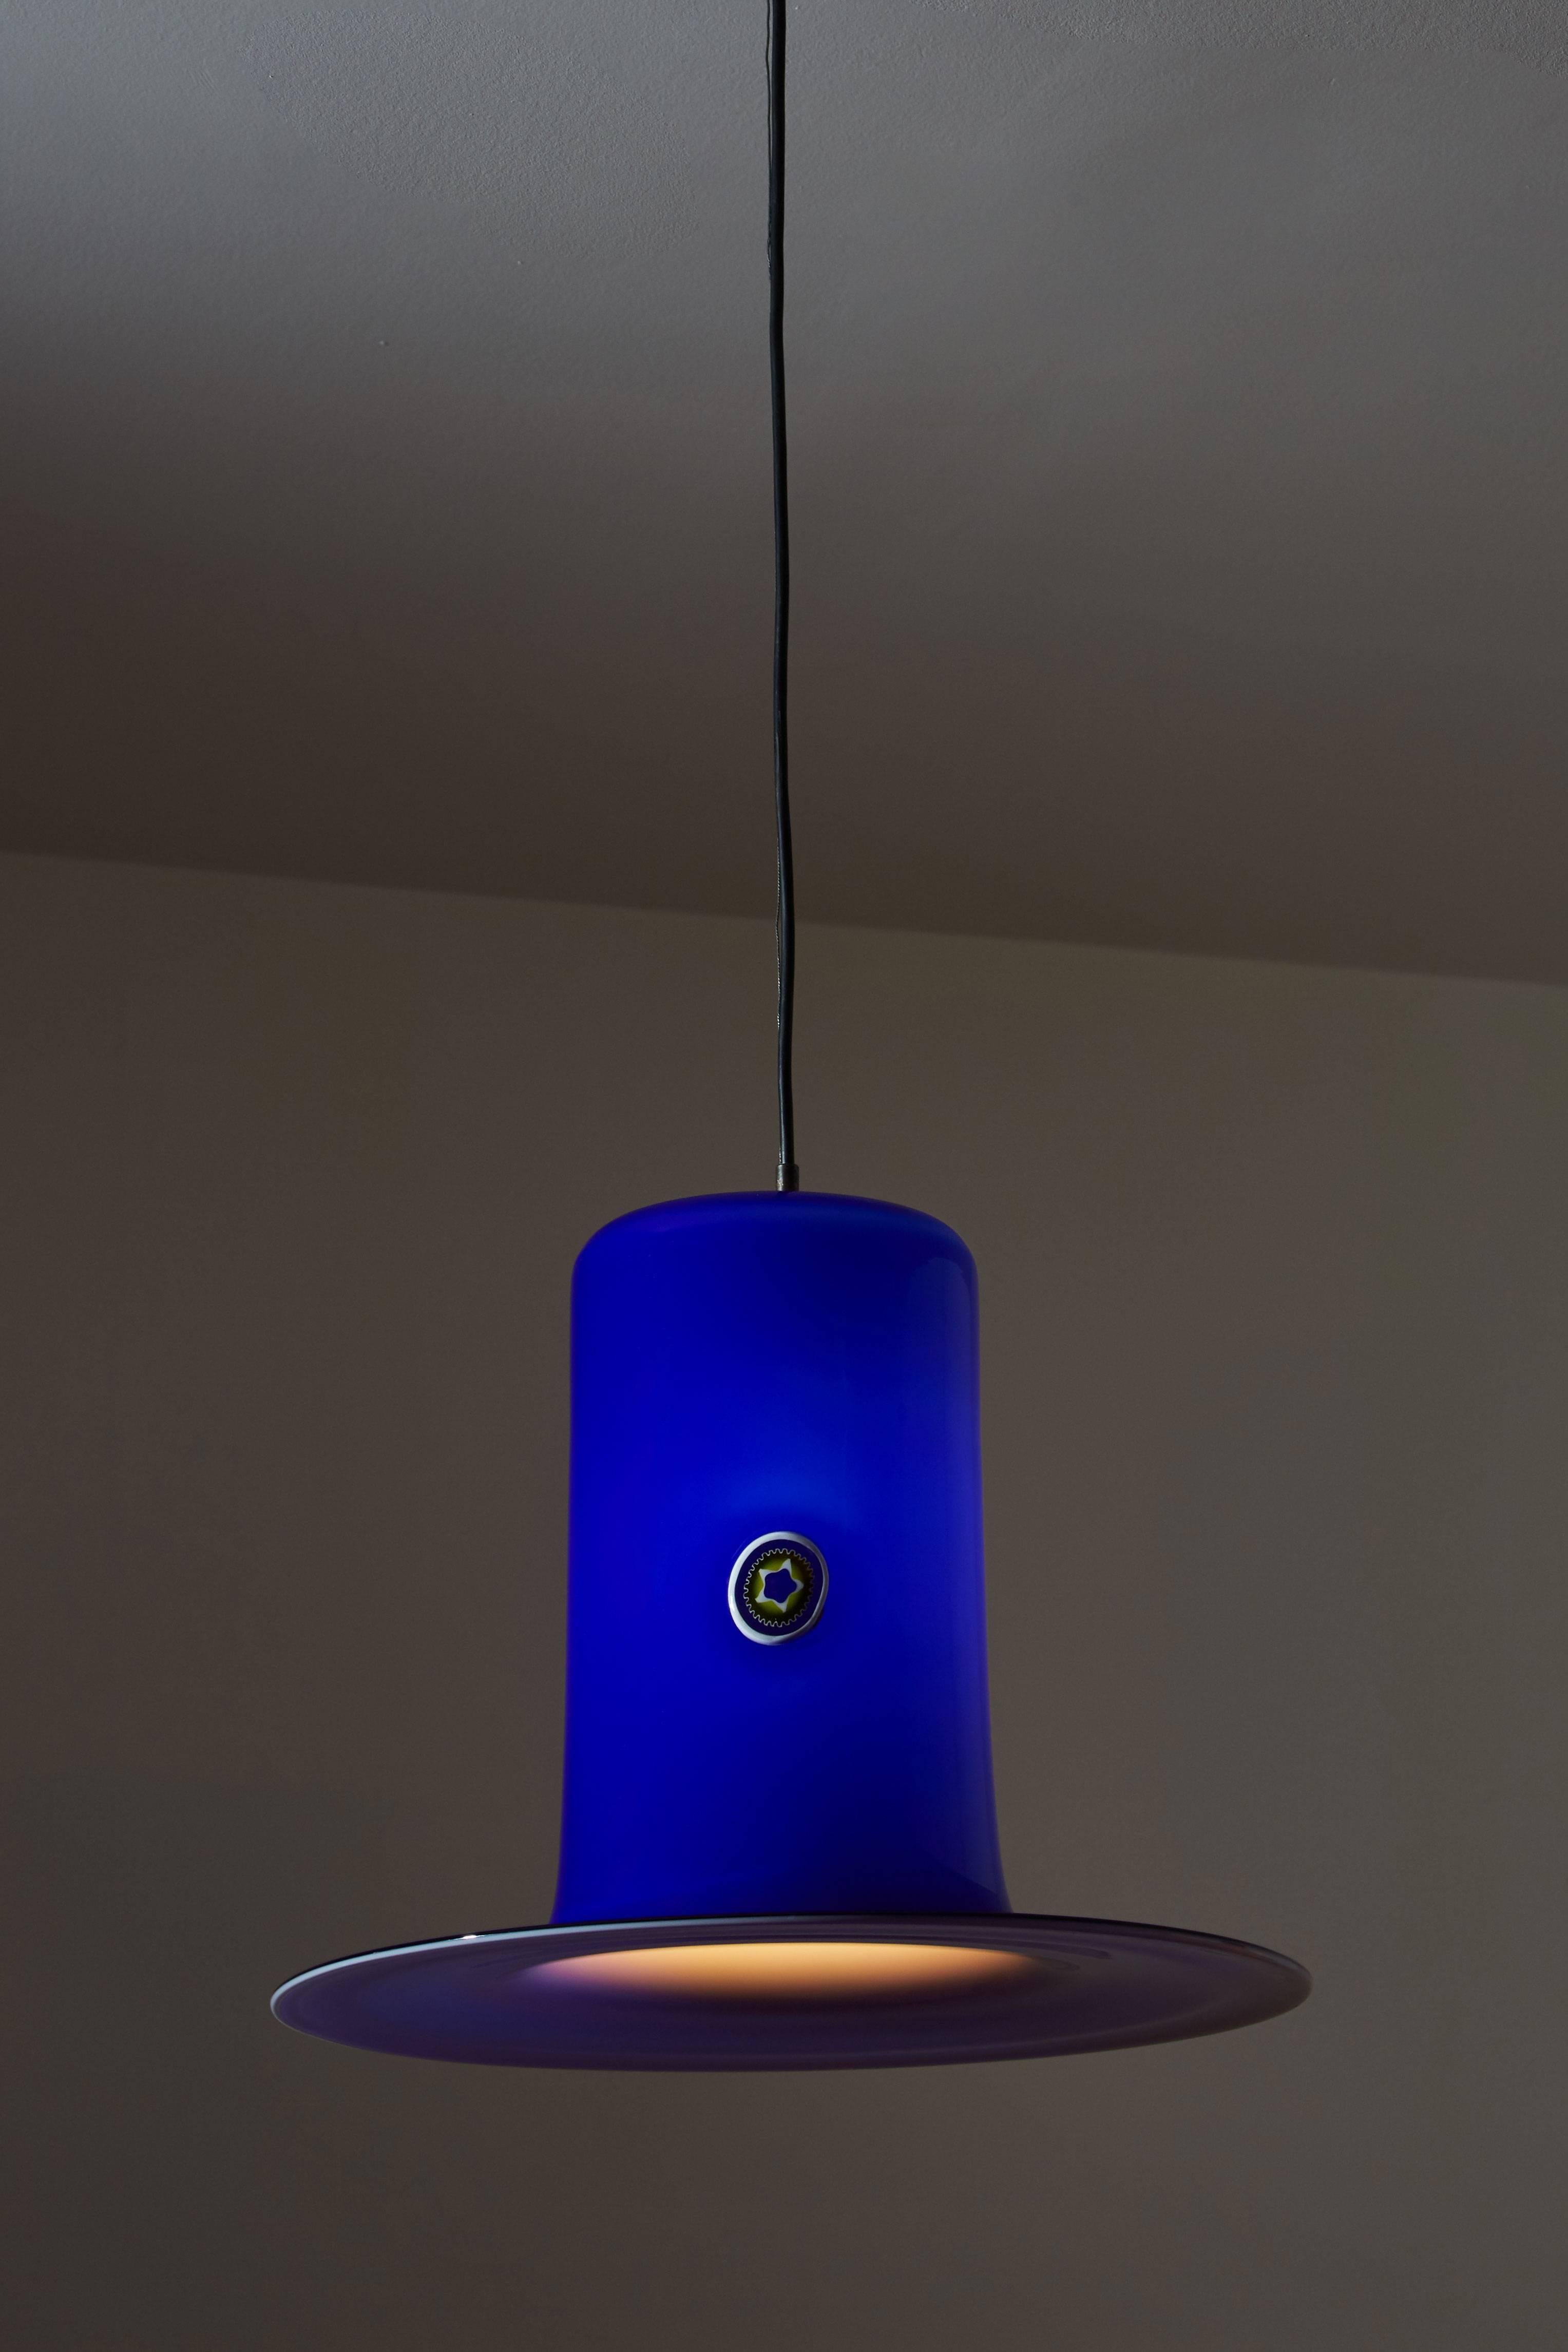 Handblown glass pendant by Alessandro Pianon for Vistosi designed in Italy, circa 1960s. Colored Murano glass with small murine in centre of fixture. Retains original manufacturers label. Wired for US junction boxes. Takes one E27 75w maximum bulb.